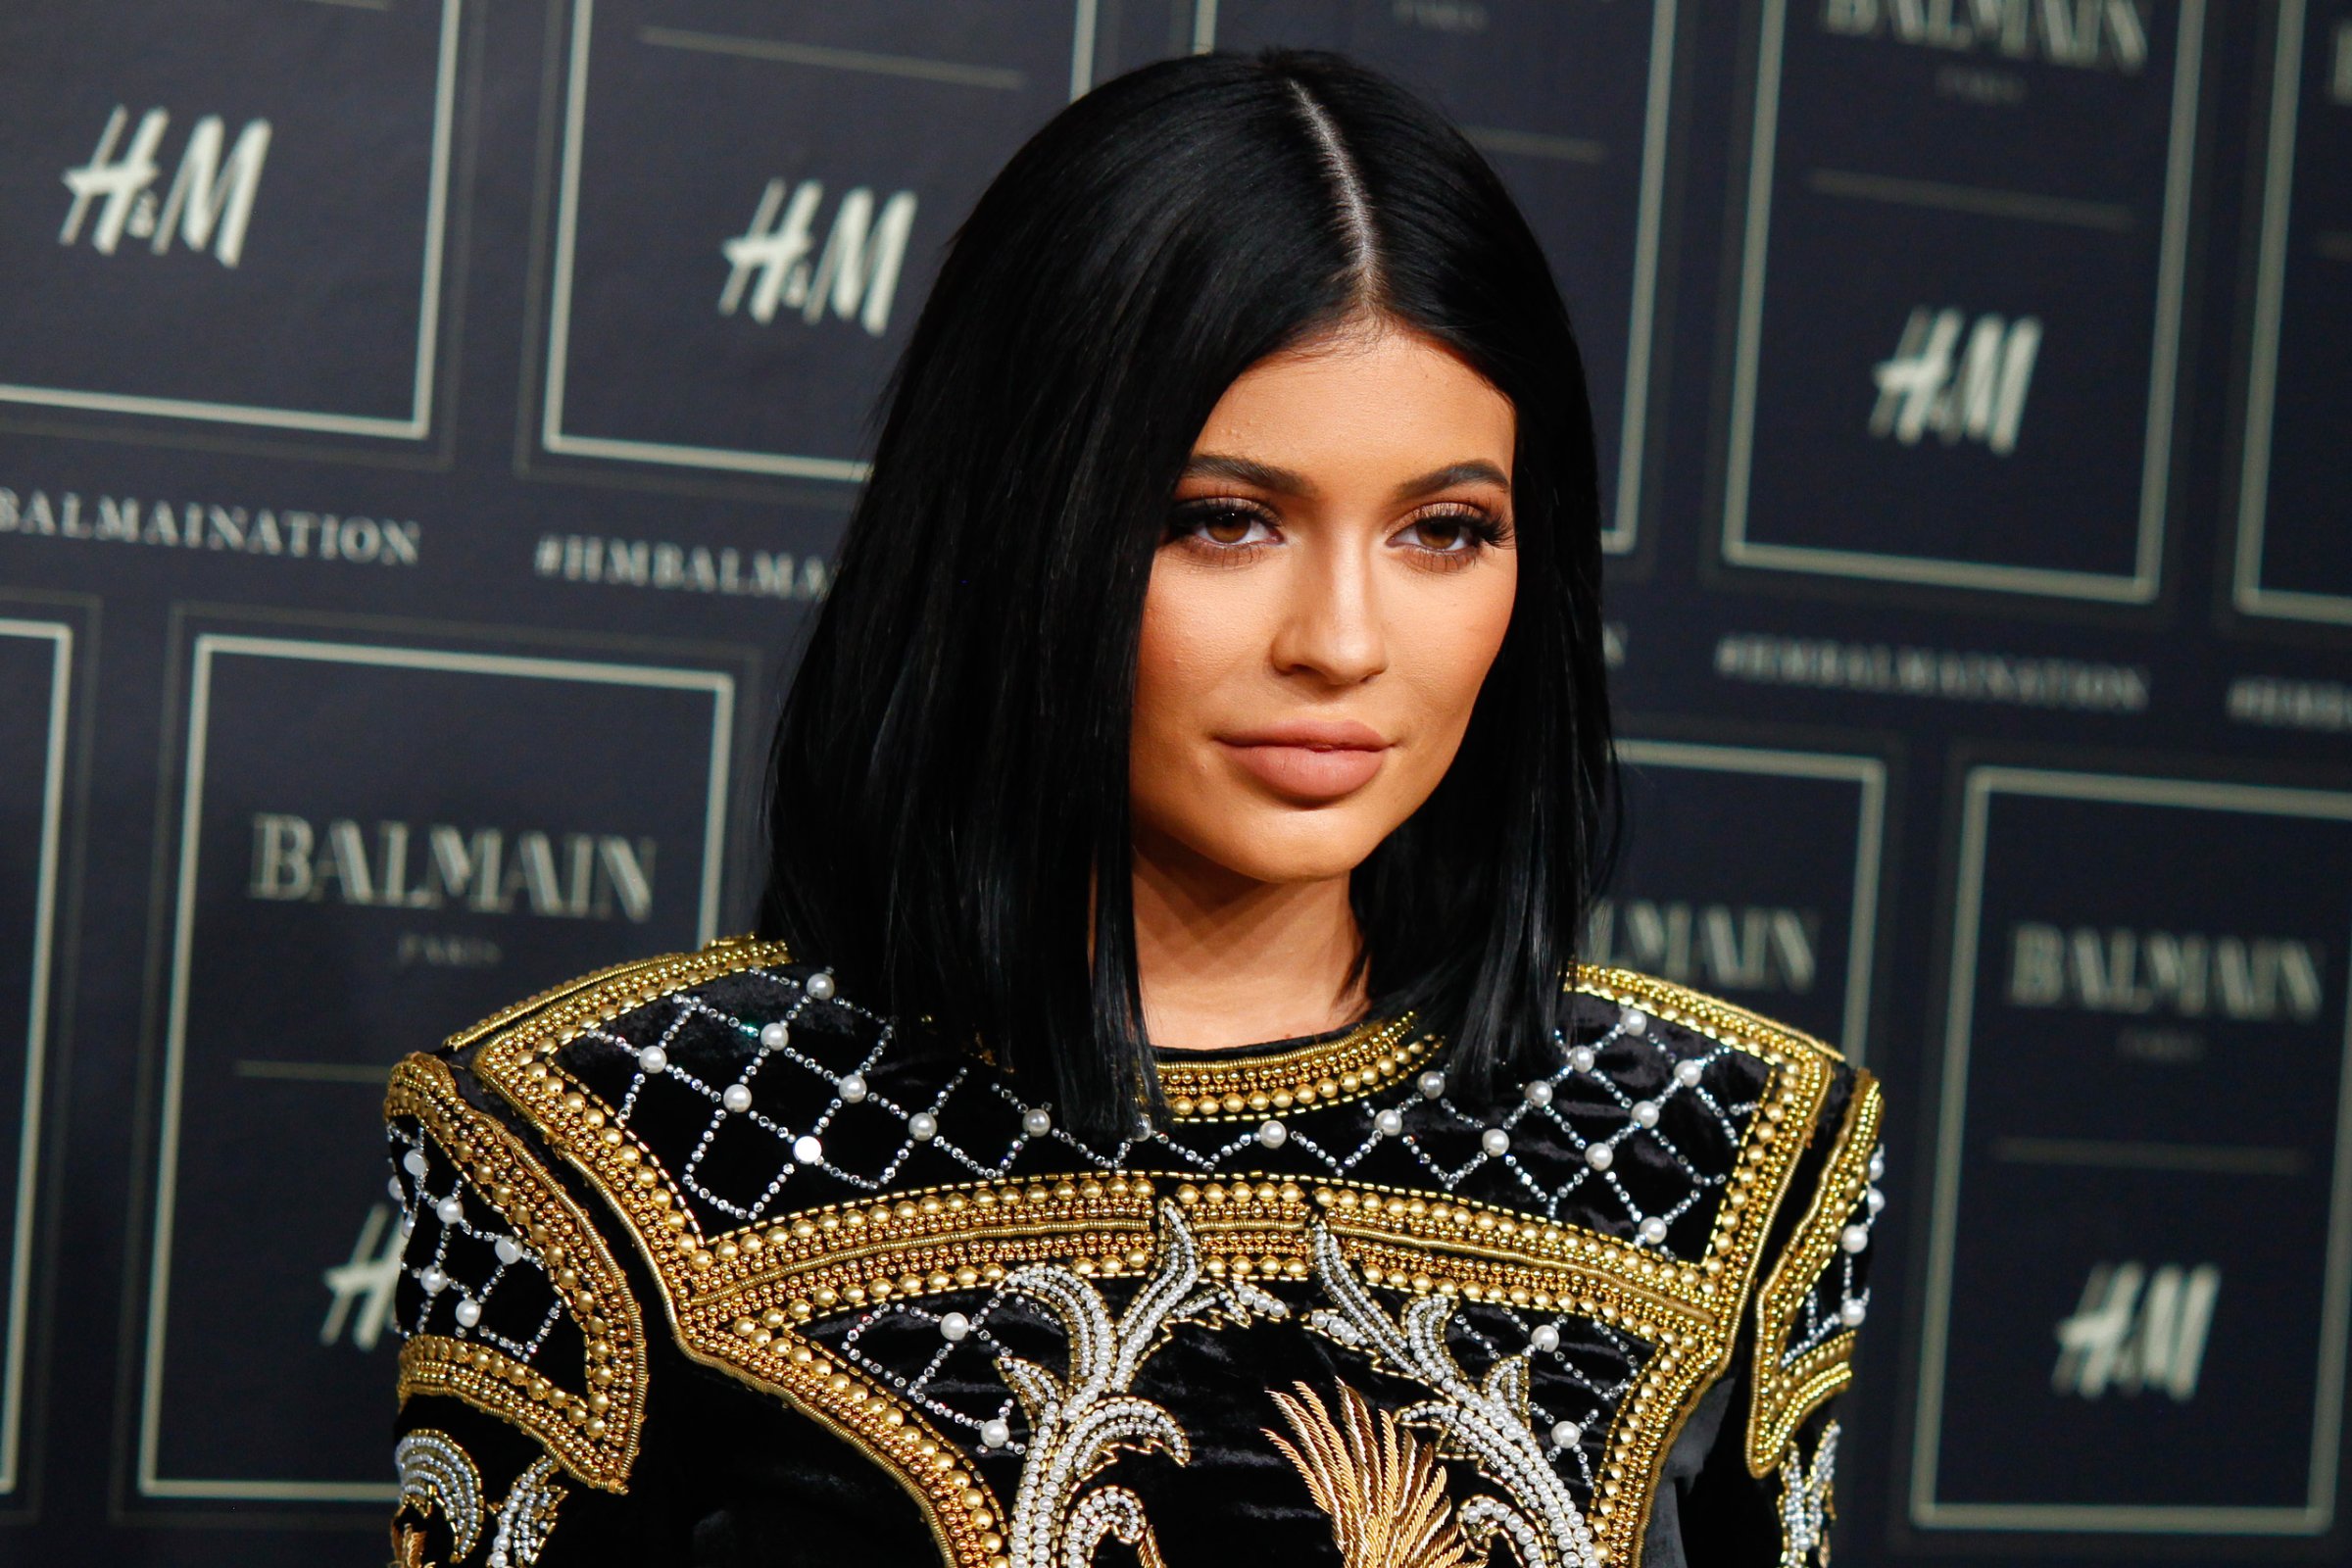 Kylie Jenner attends the BALMAIN x H&M Collection launch event at 23 Wall Street on Tuesday, Oct. 20, 2015, in New York. (Photo by Andy Kropa/Invision/AP)